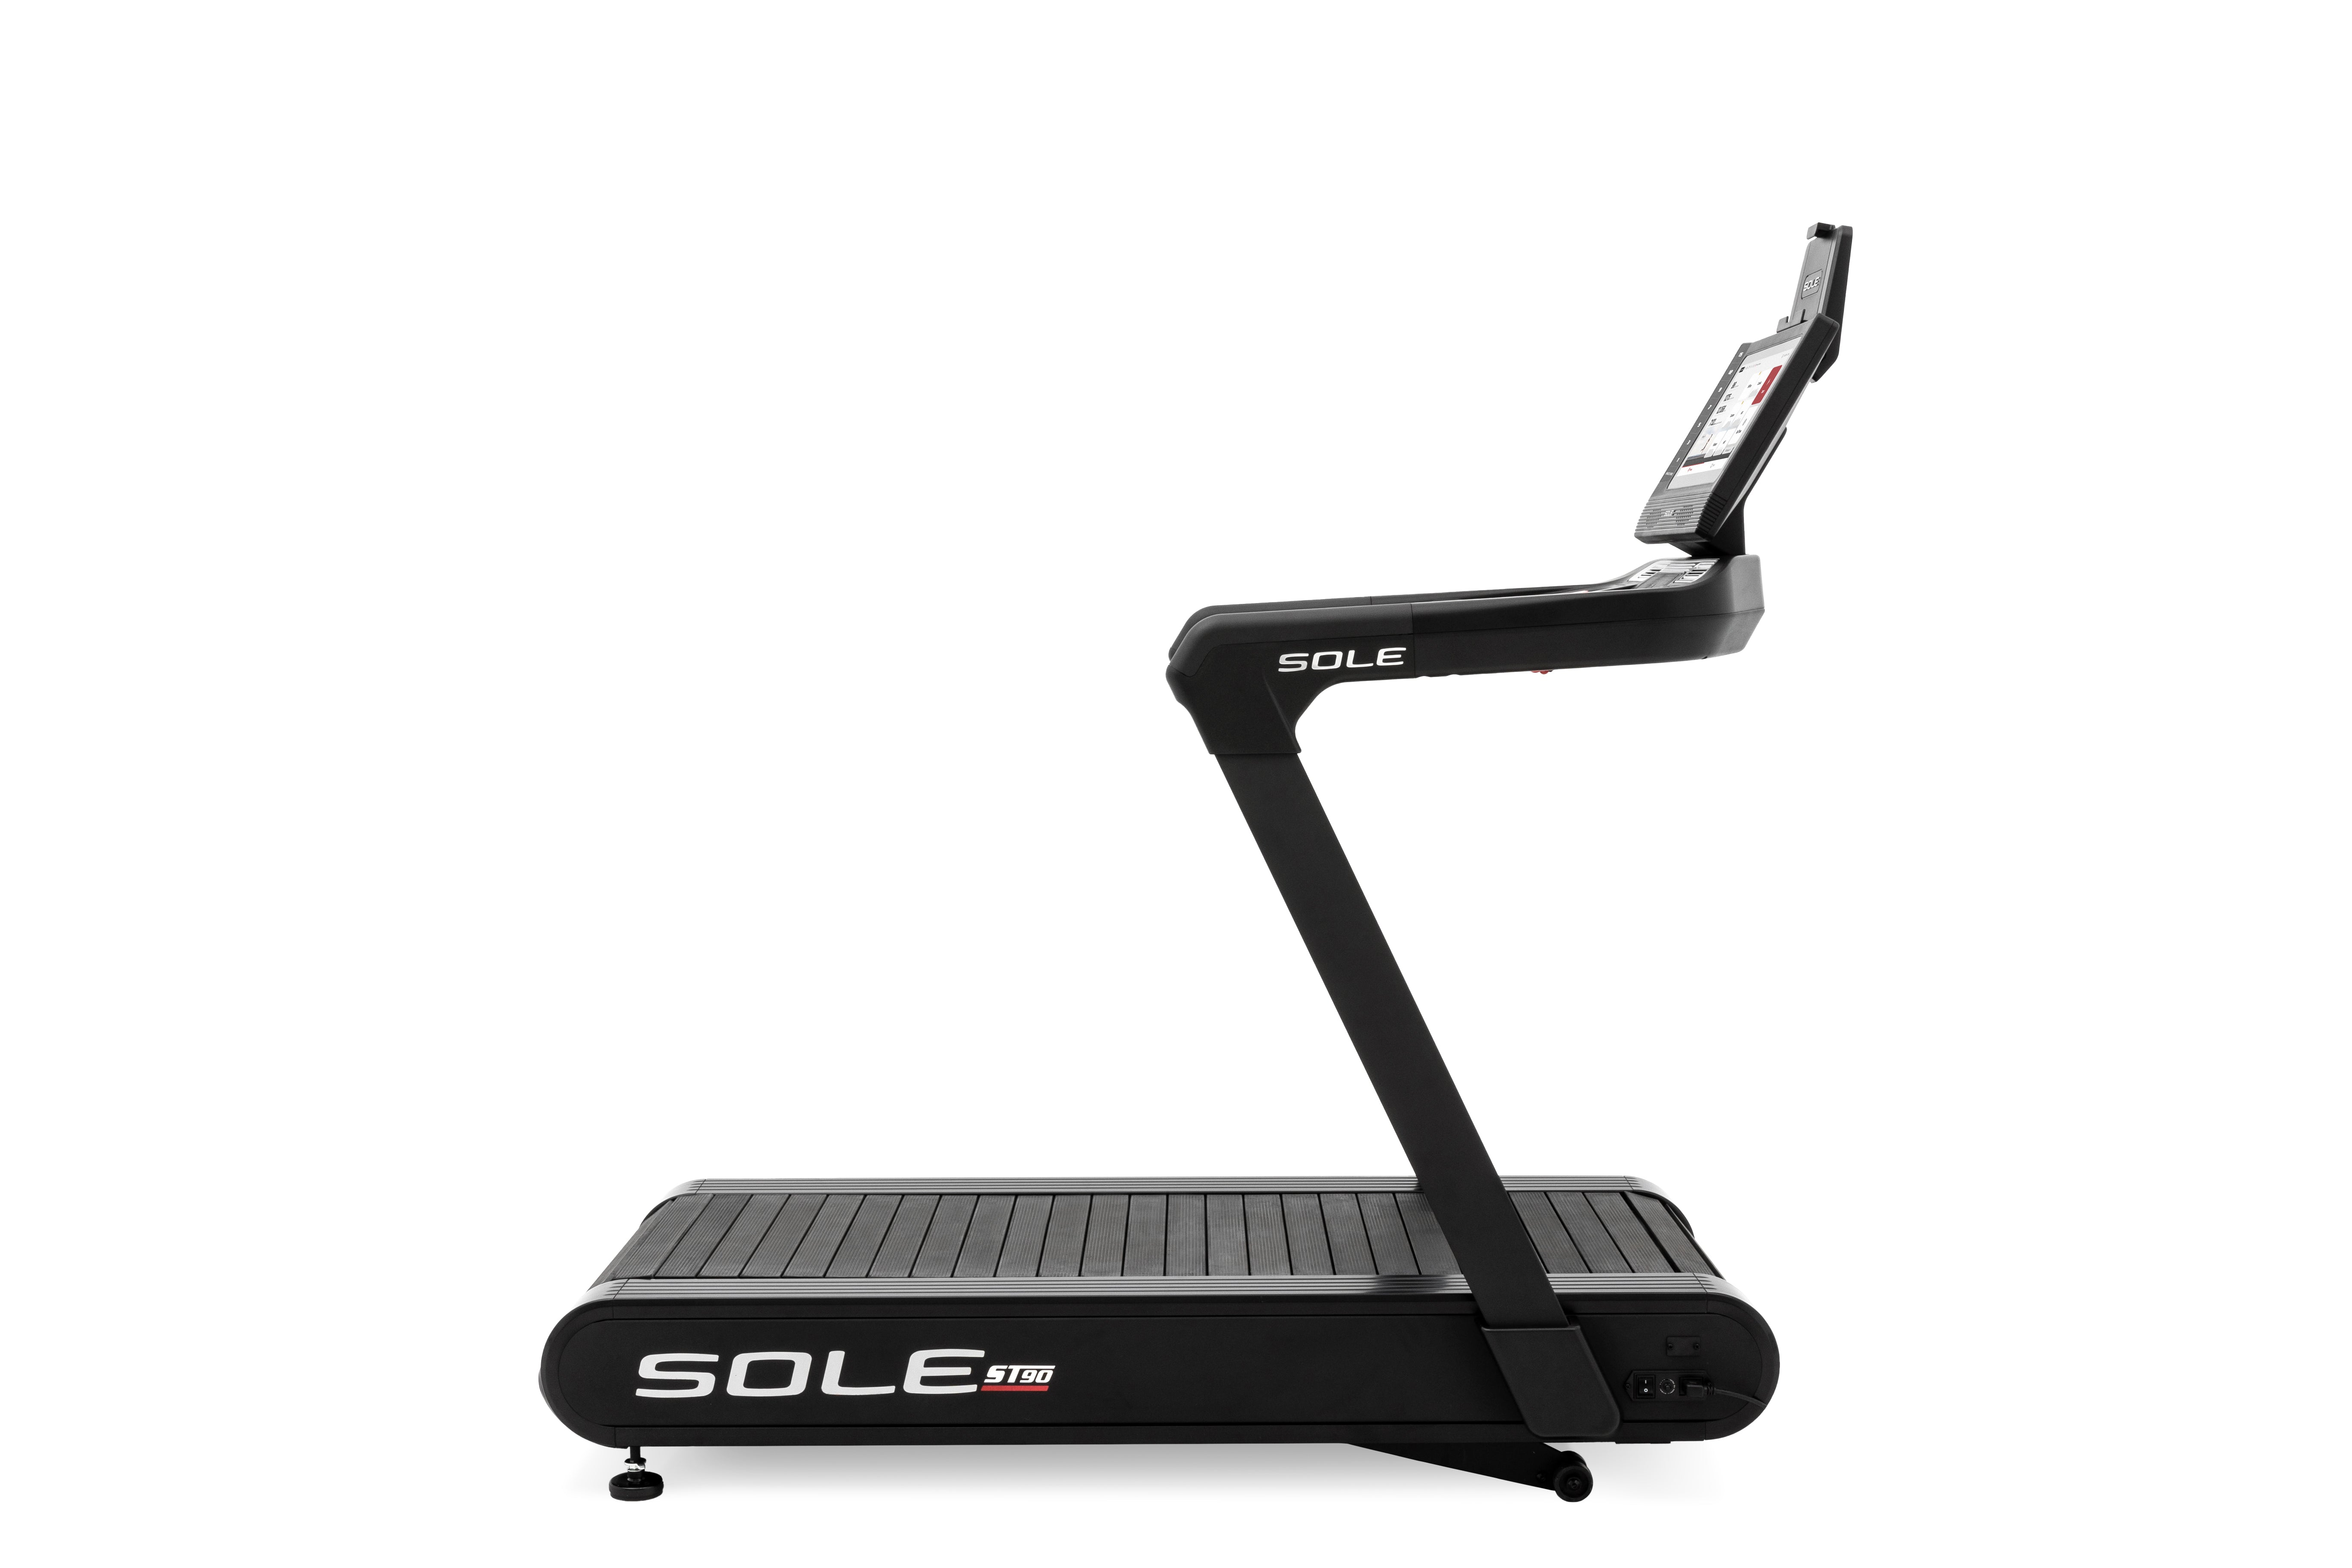 Angled view of the Sole ST90 treadmill showcasing its black frame, digital touchscreen console, branded running belt, and sturdy side arms, all against a white backdrop.